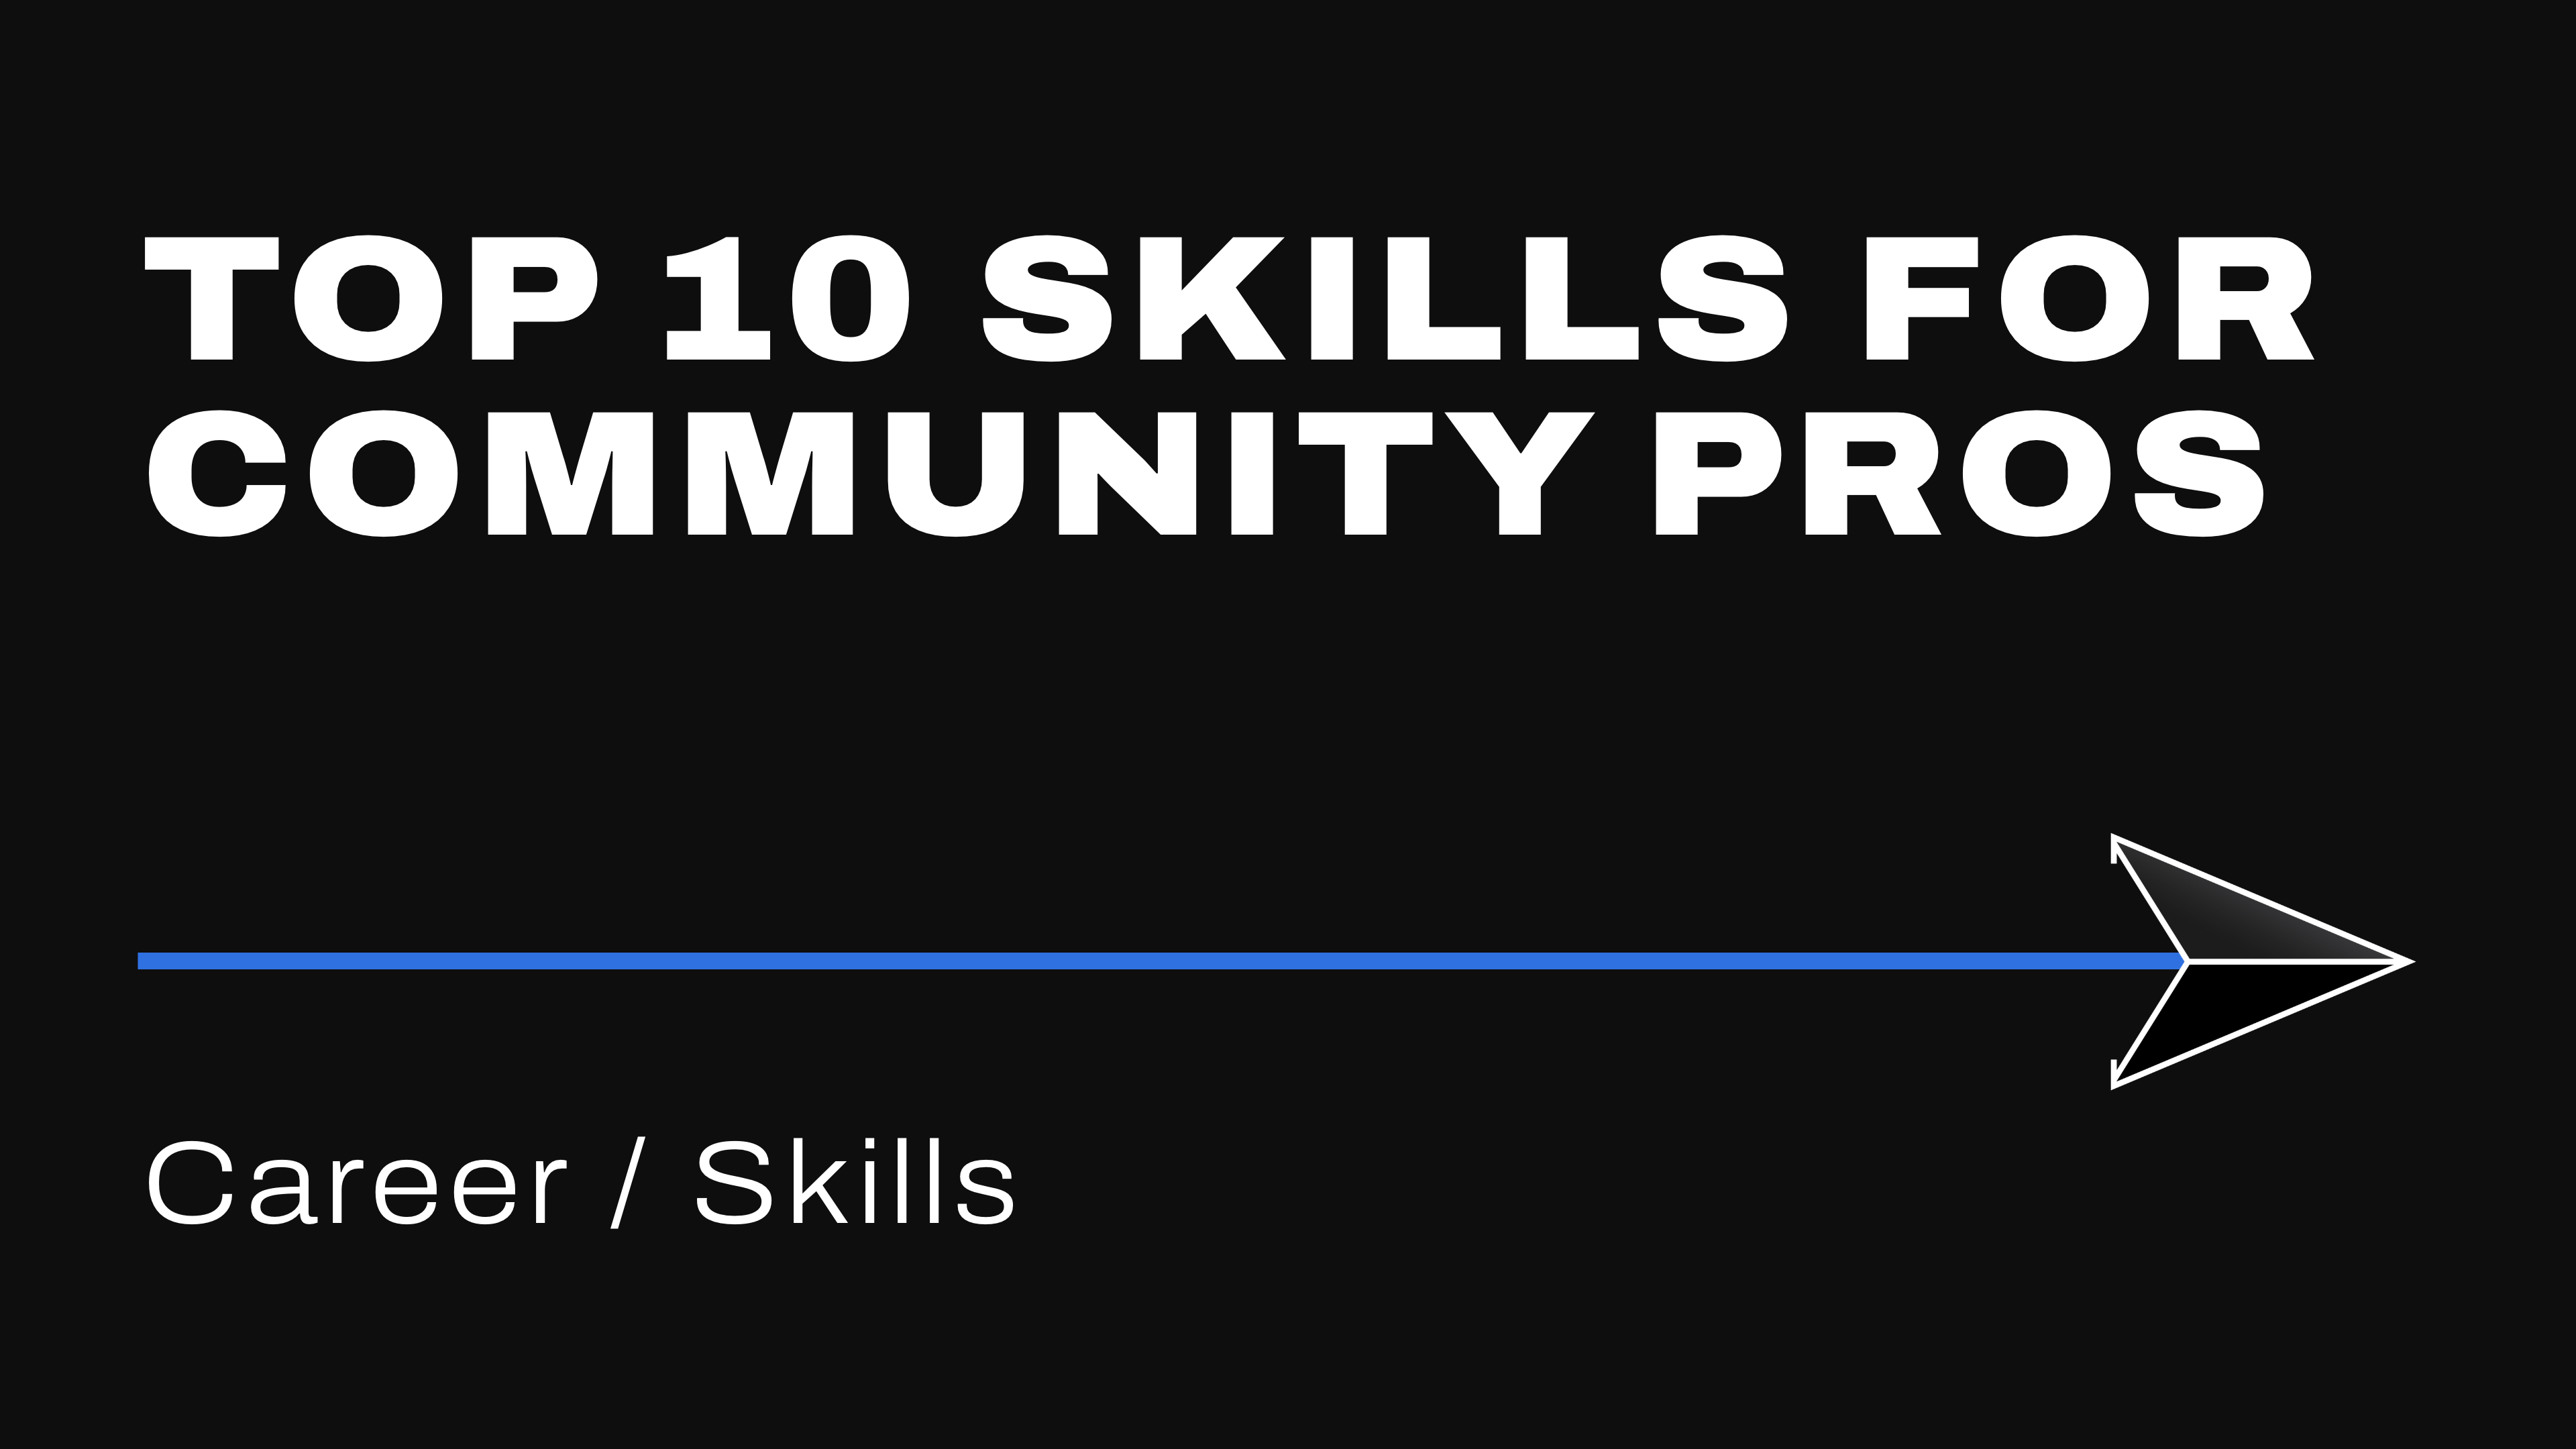 Top 10 Skills For Community Pros